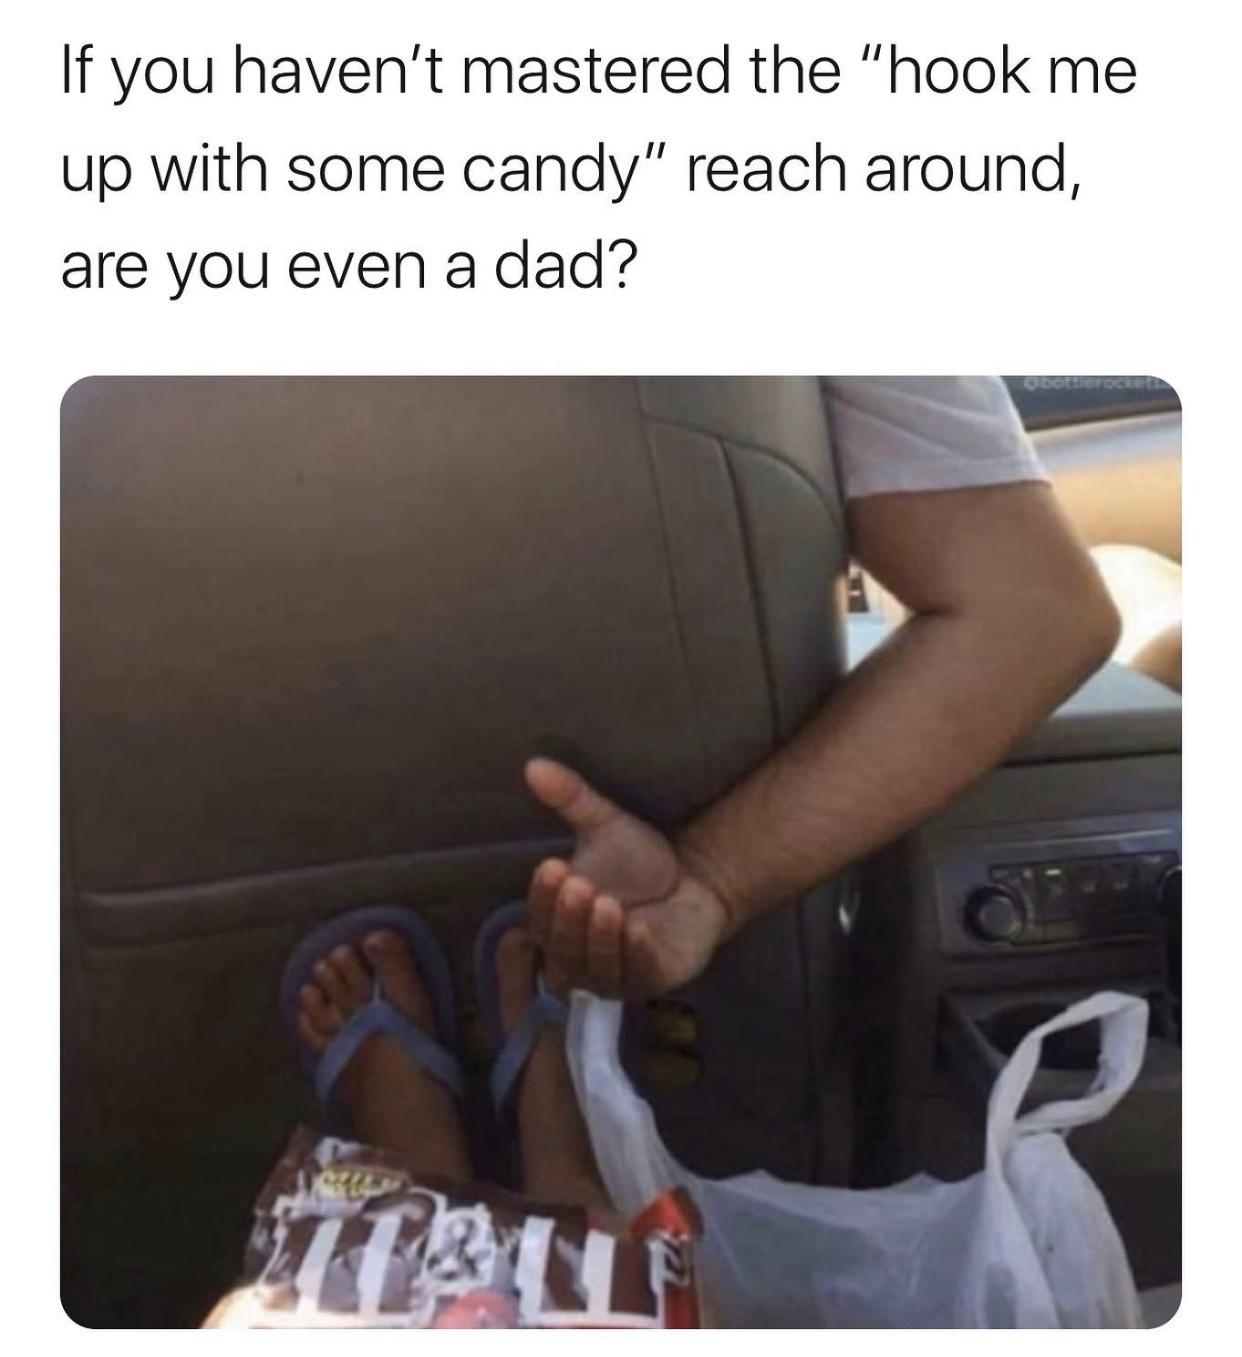 dad tax - If you haven't mastered the "hook me up with some candy" reach around, are you even a dad?